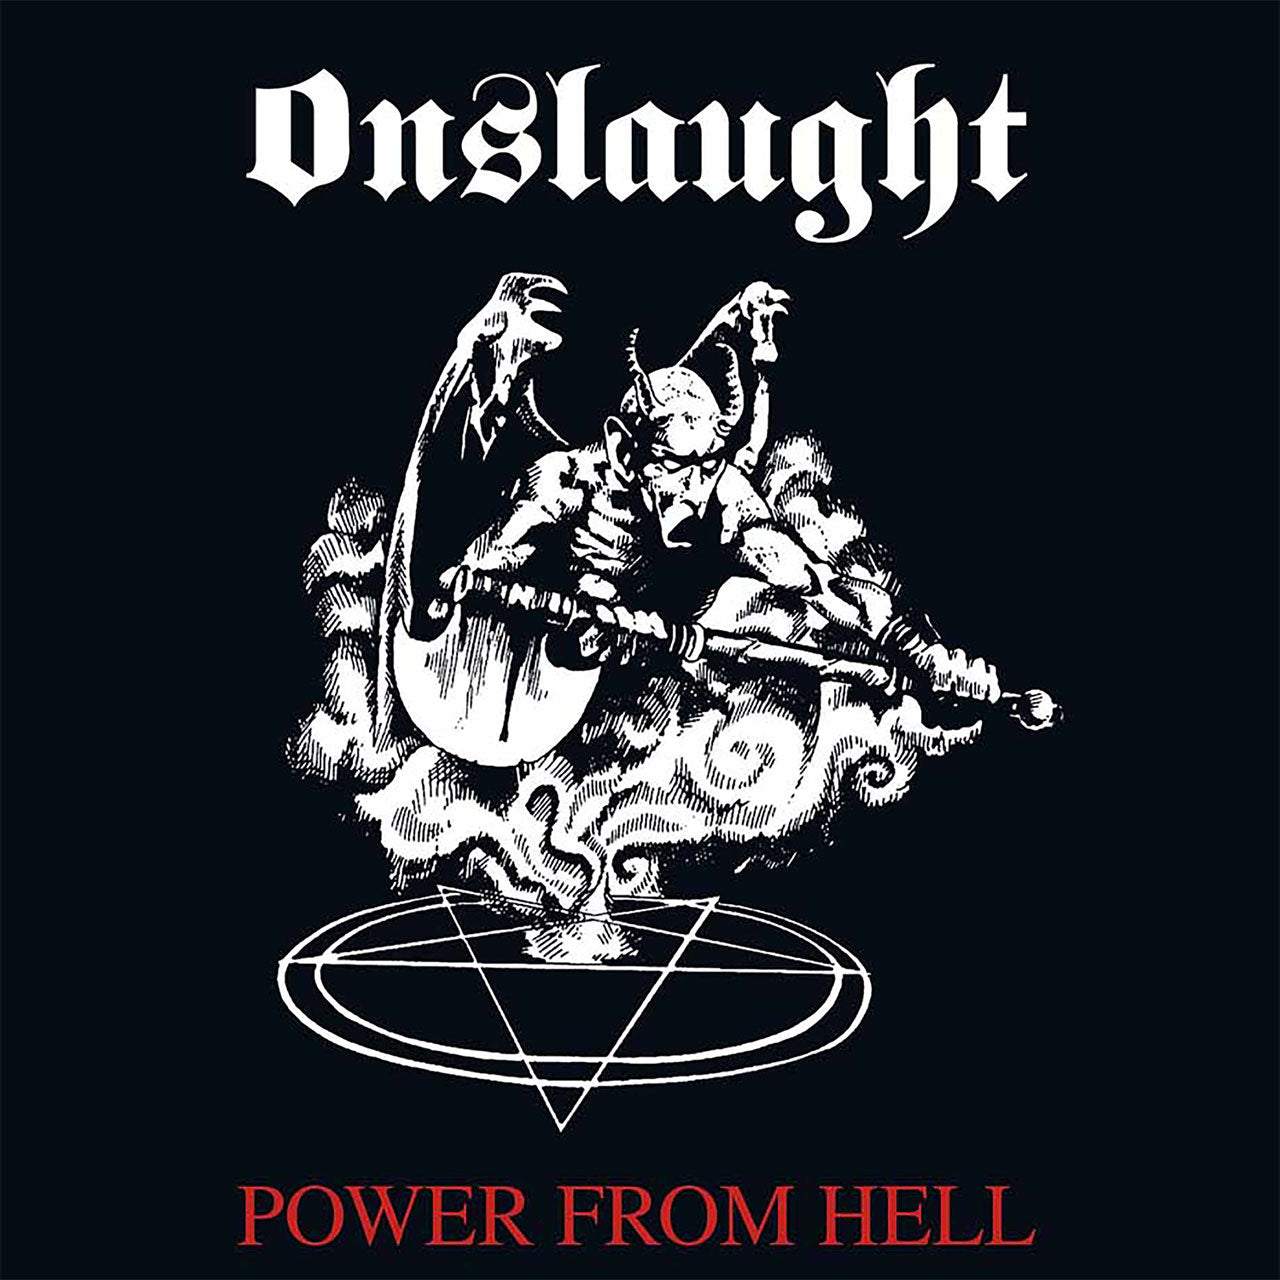 Onslaught - Power from Hell (2011 Reissue) (CD)